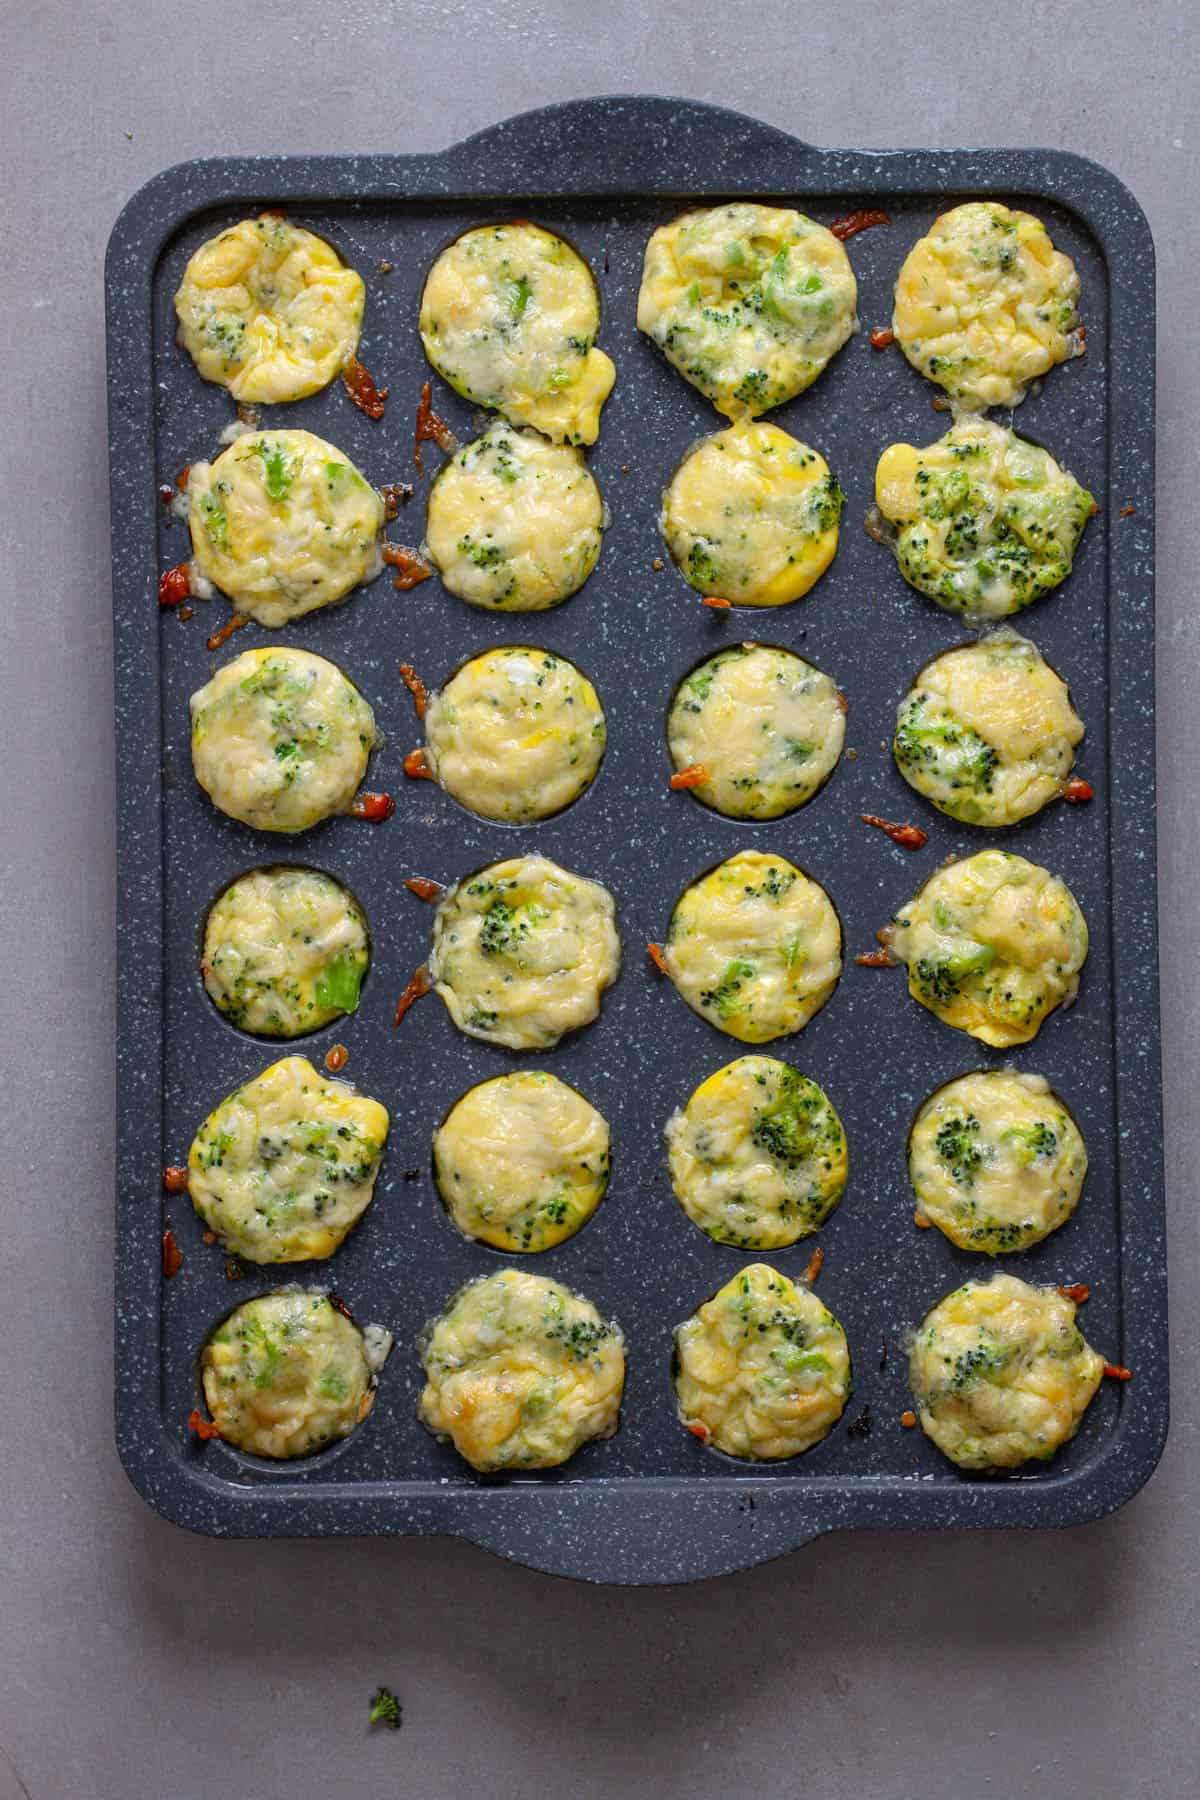 Puffy cooked mini broccoli and cheddar egg bites in a mini muffin pan.